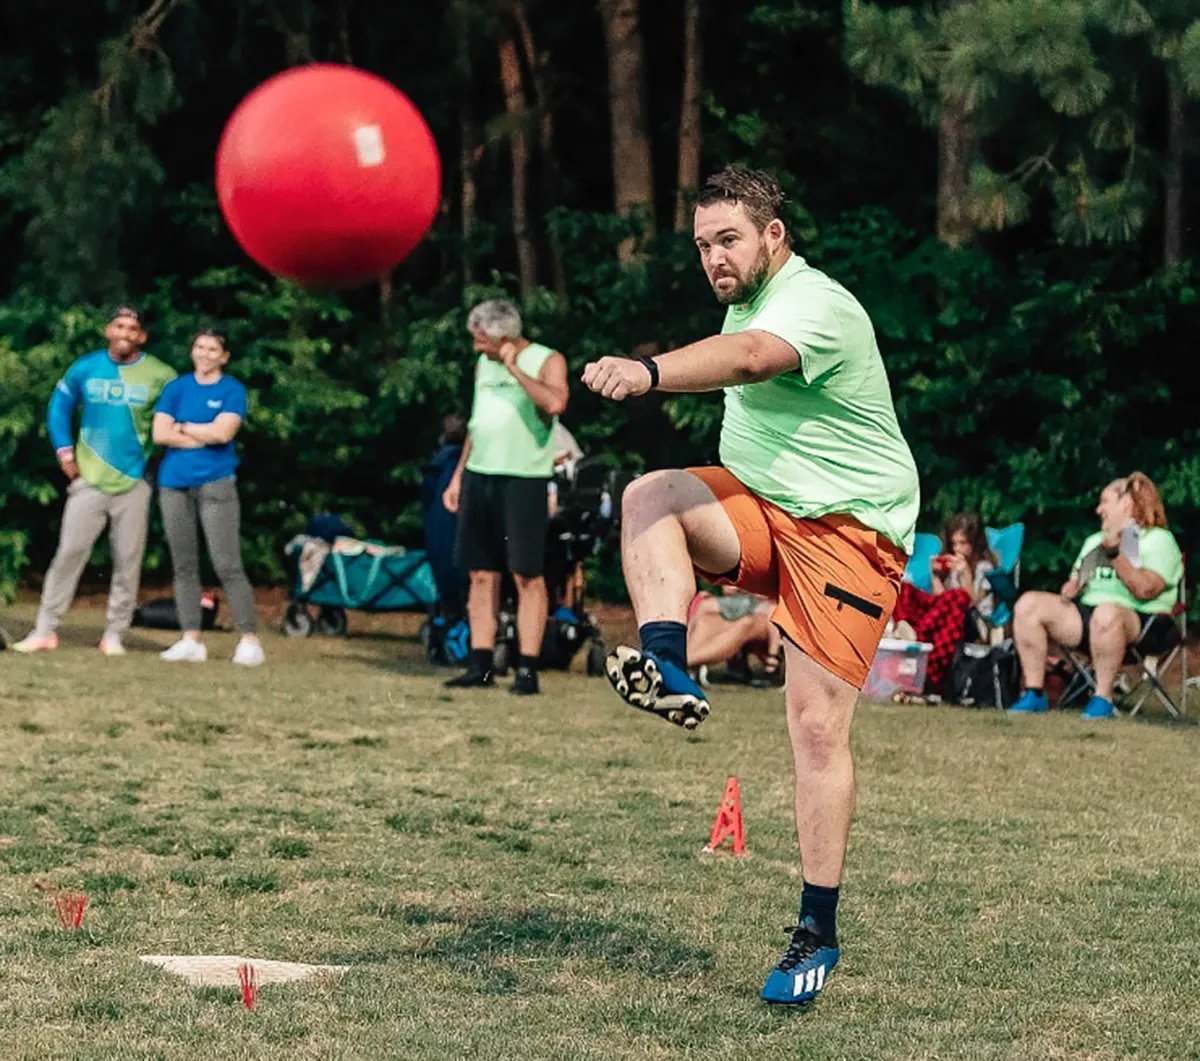 man in lime green shirt with one leg raised after just kicking a kickball